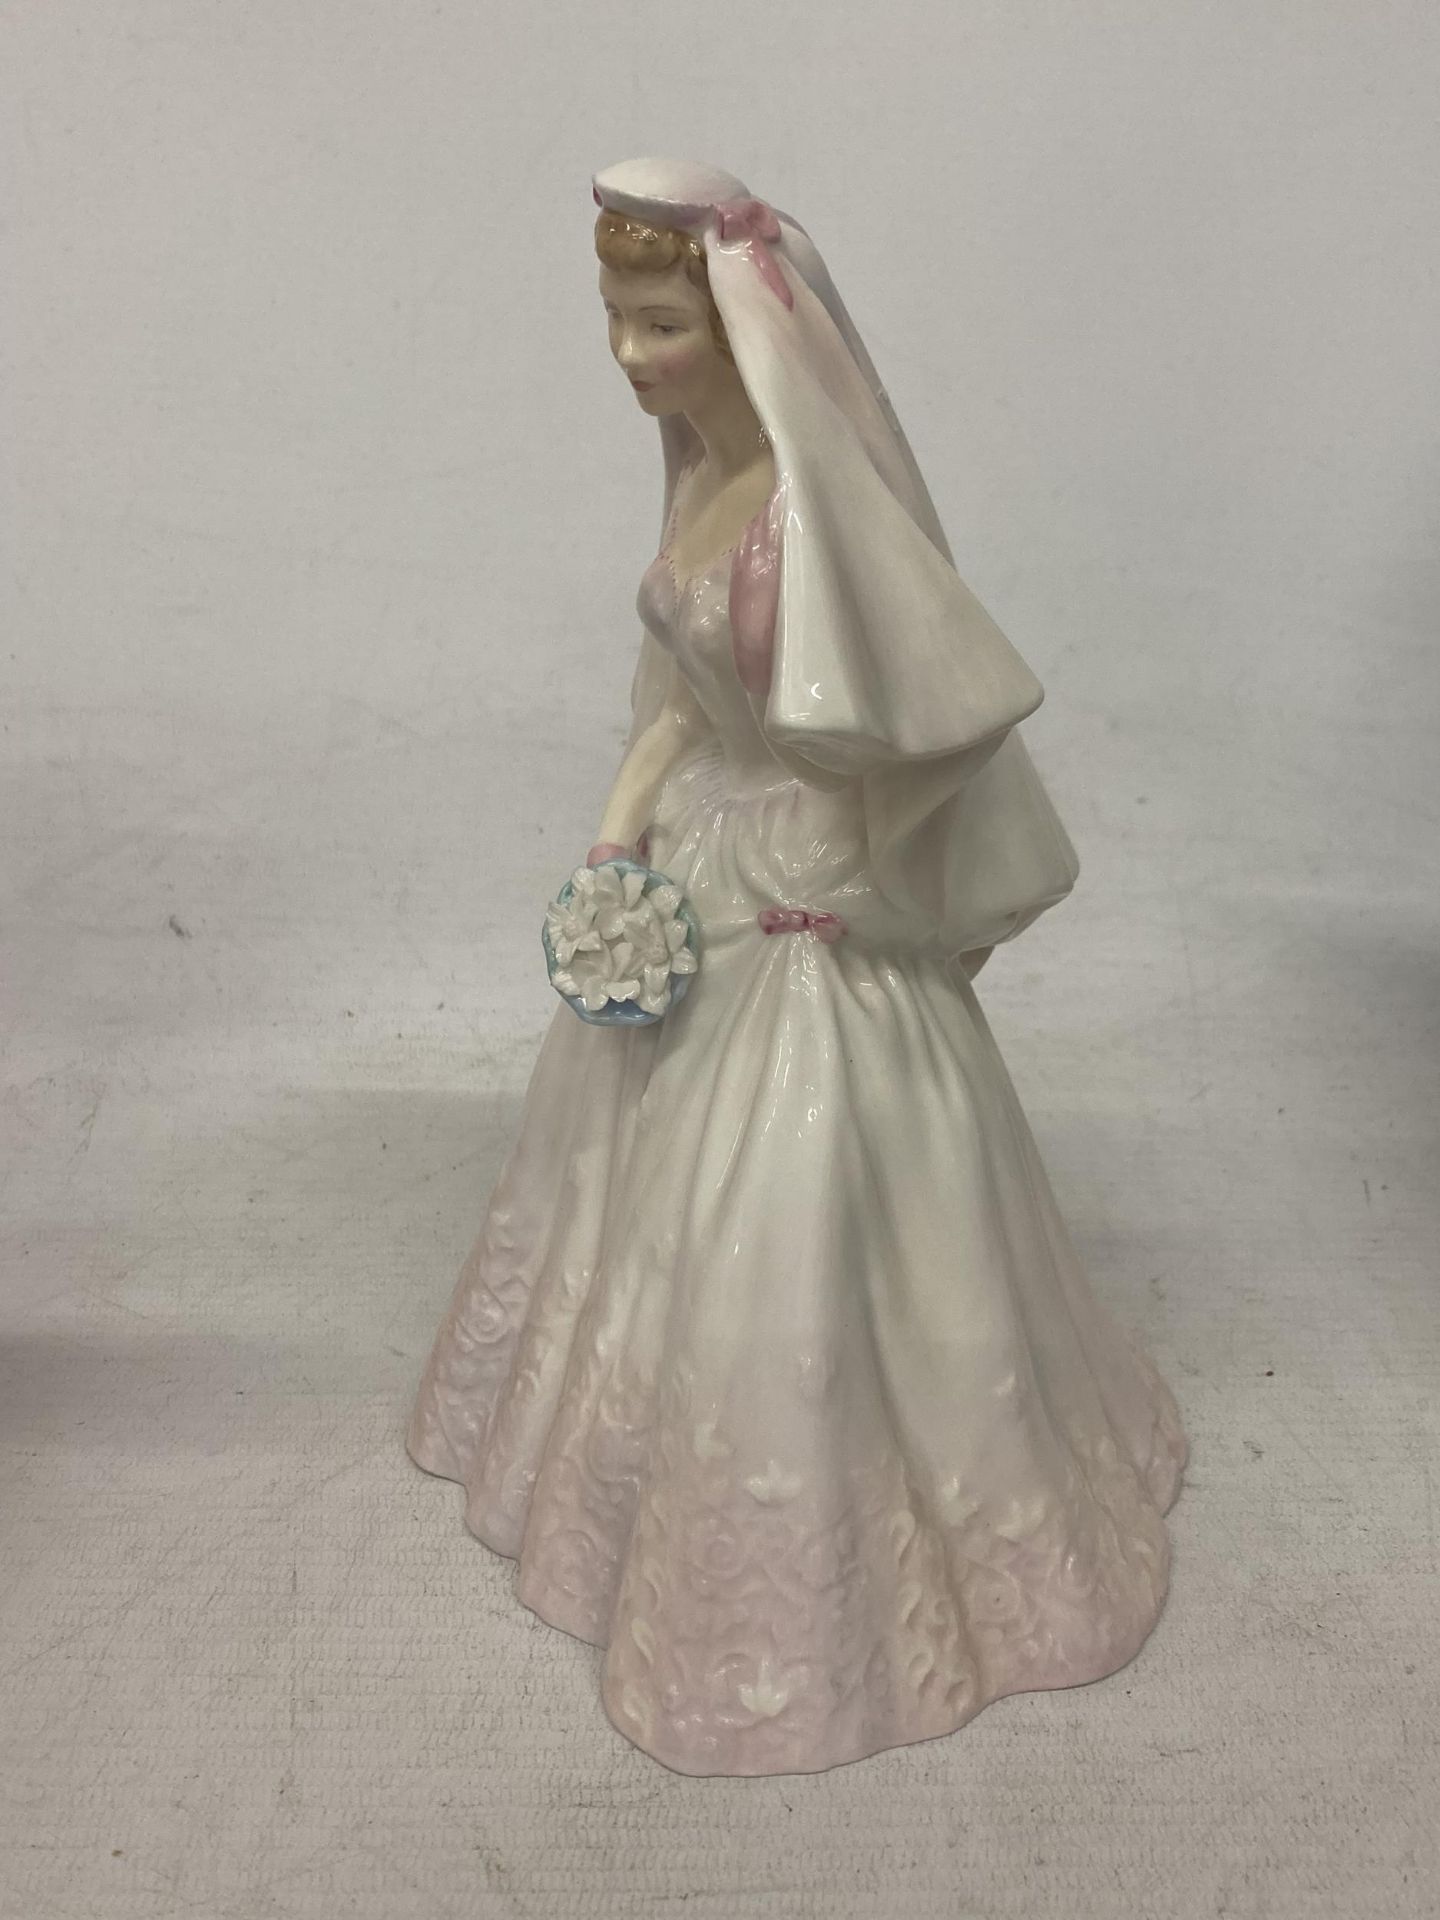 A ROYAL DOULTON FIGURINE "THE BRIDE" HN 2166 - Image 2 of 4